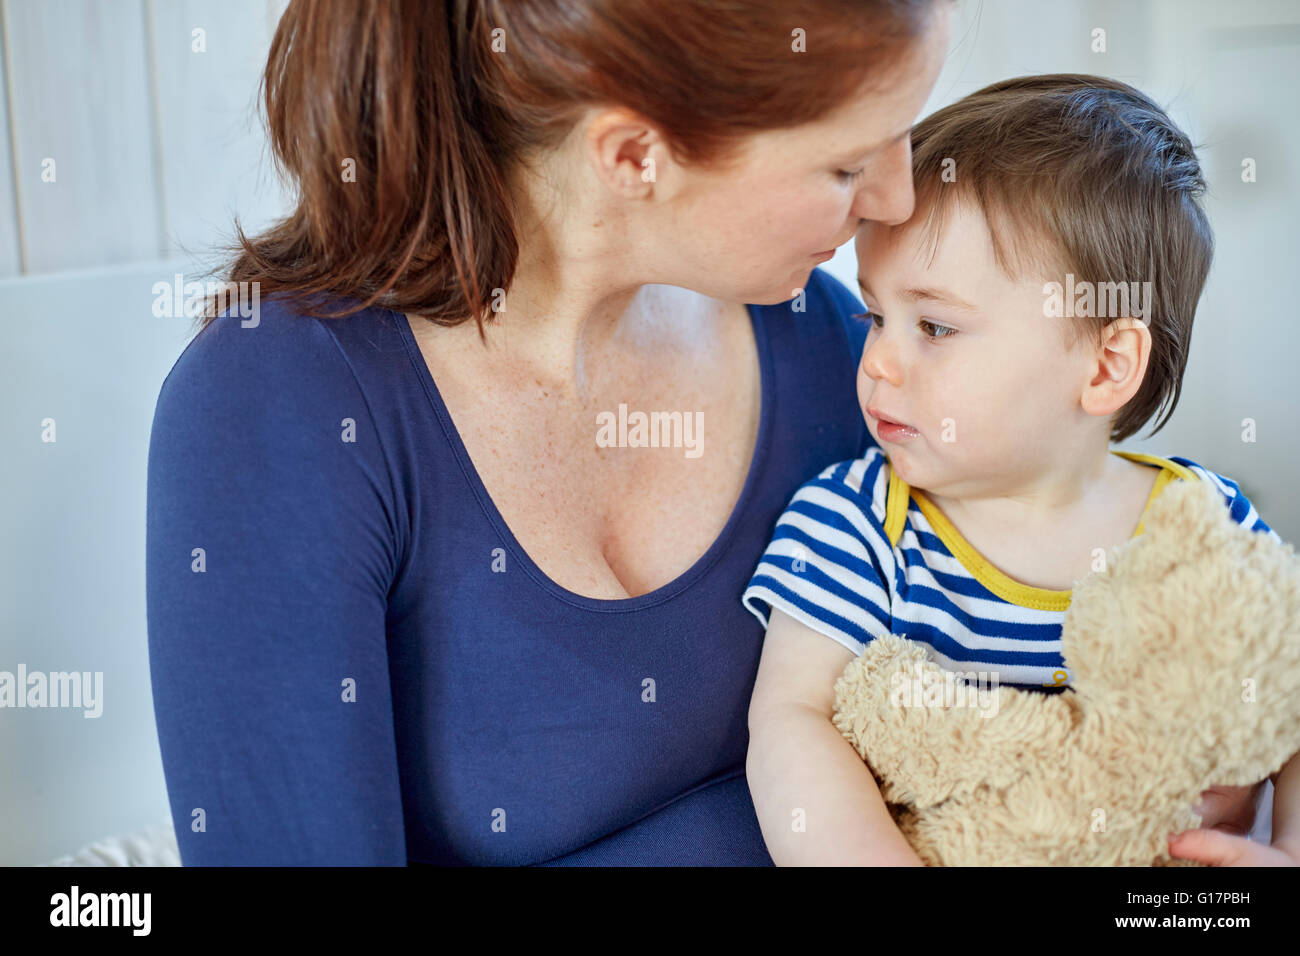 Mother and baby boy holding teddy bear Stock Photo